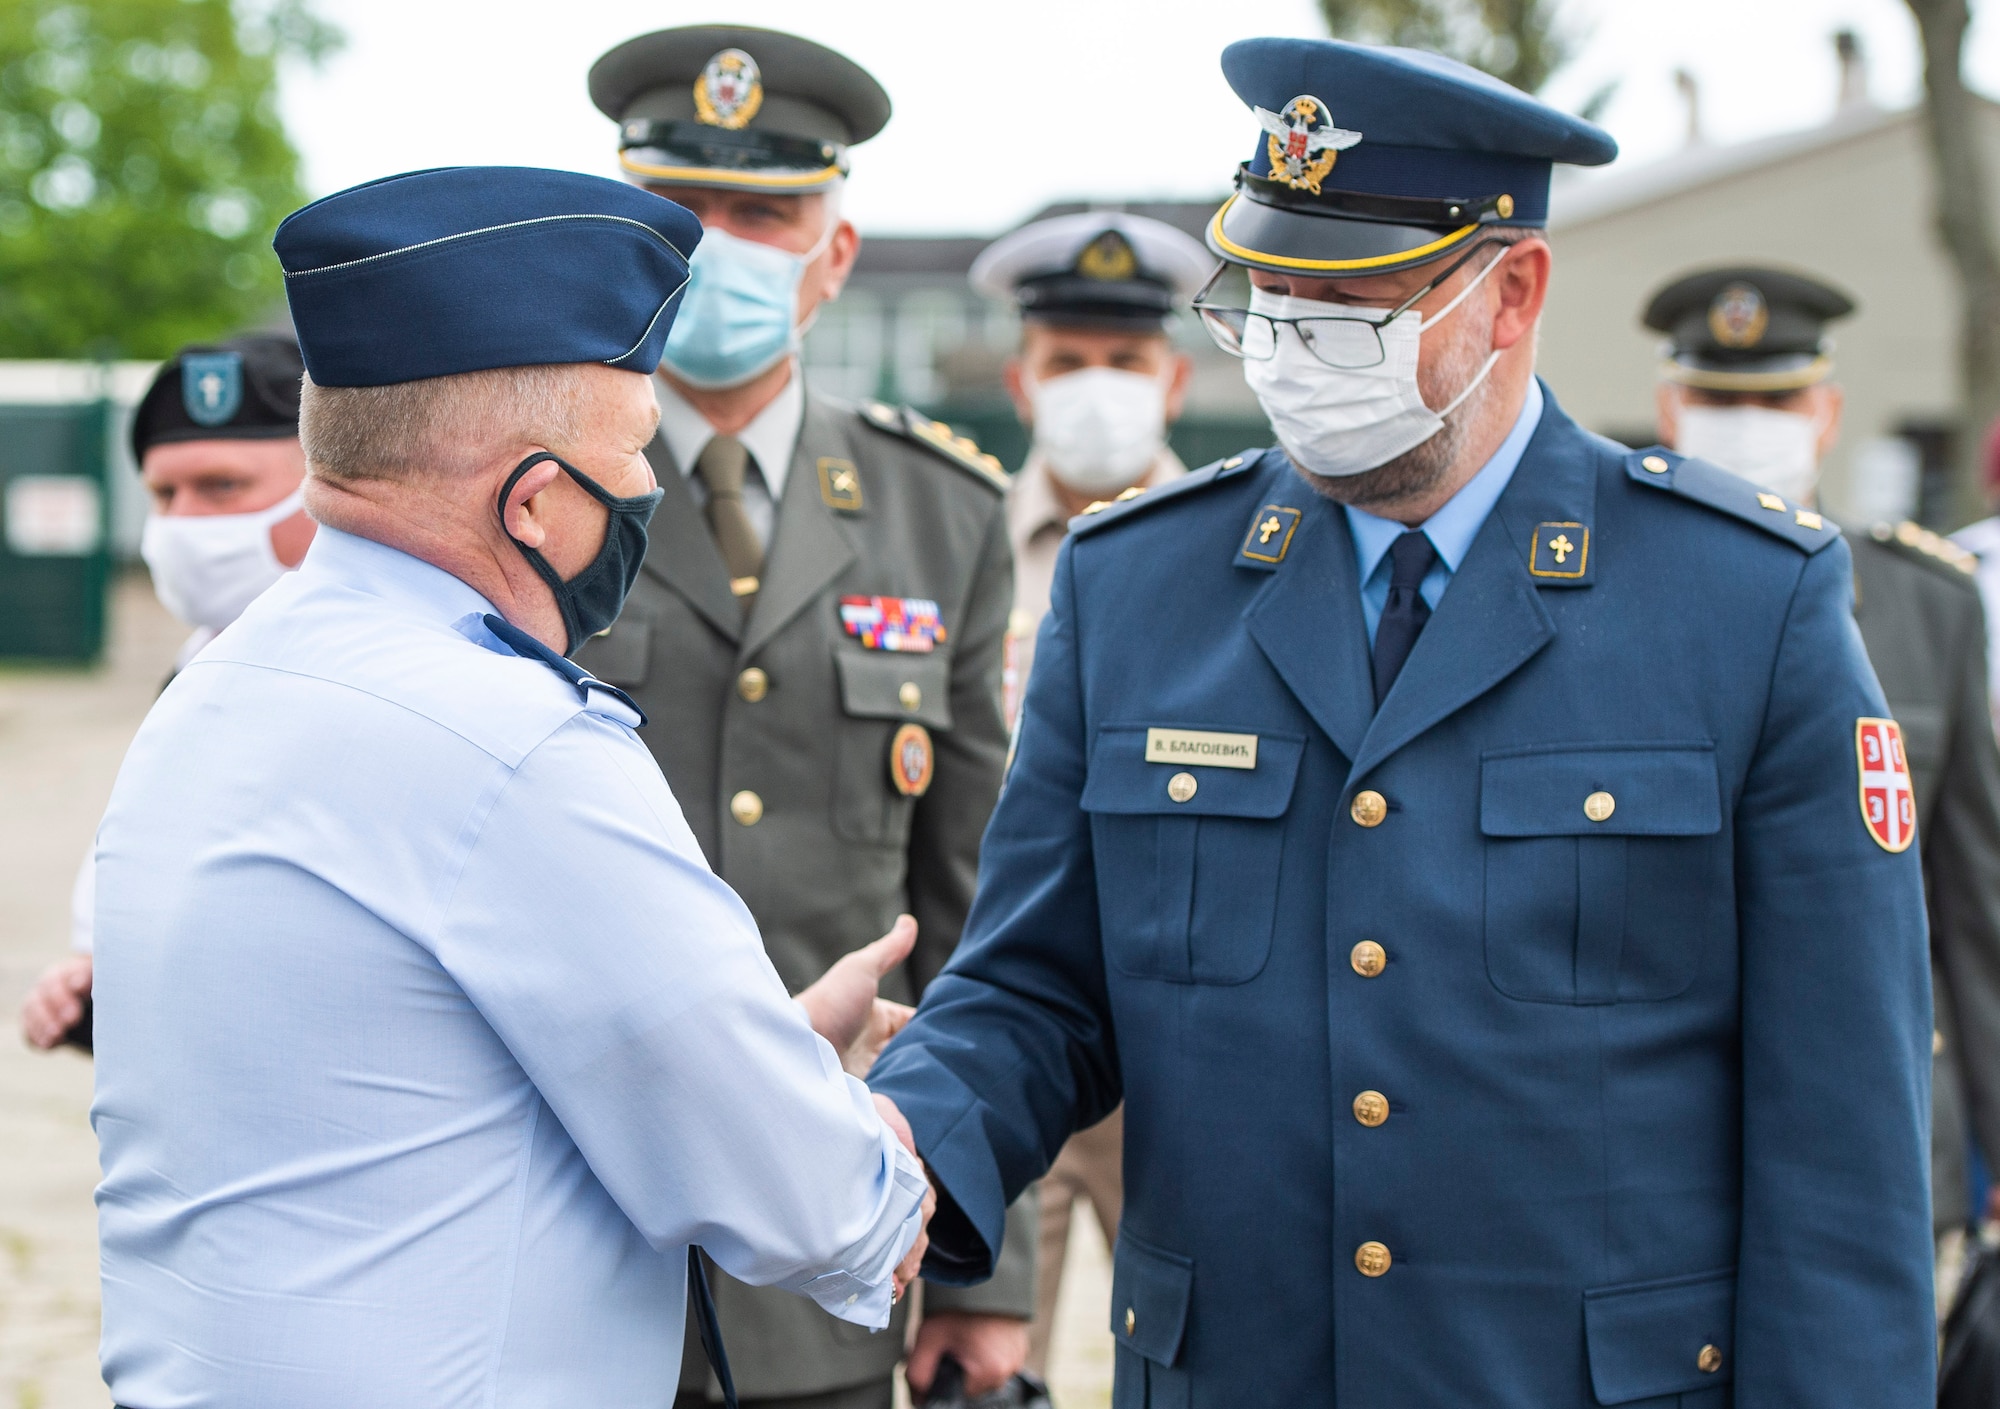 Lt. Vladimir Blagojevic, Serbian Air Force orthodox chaplain, is greeted by Col. Kim Bowen, 88th Air Base Wing chaplain, upon his arrival to the Prairies Chapel at Wright-Patterson Air Force Base, Ohio, May 11, 2021. The Serbian chaplains visited the base with U.S. Army Col. Daniel Burris, chaplain for the Ohio National Guard’s Special Troops Command, as part of the National Guard's State Partnership Program. (U.S. Air Force photo by Wesley Farnsworth)